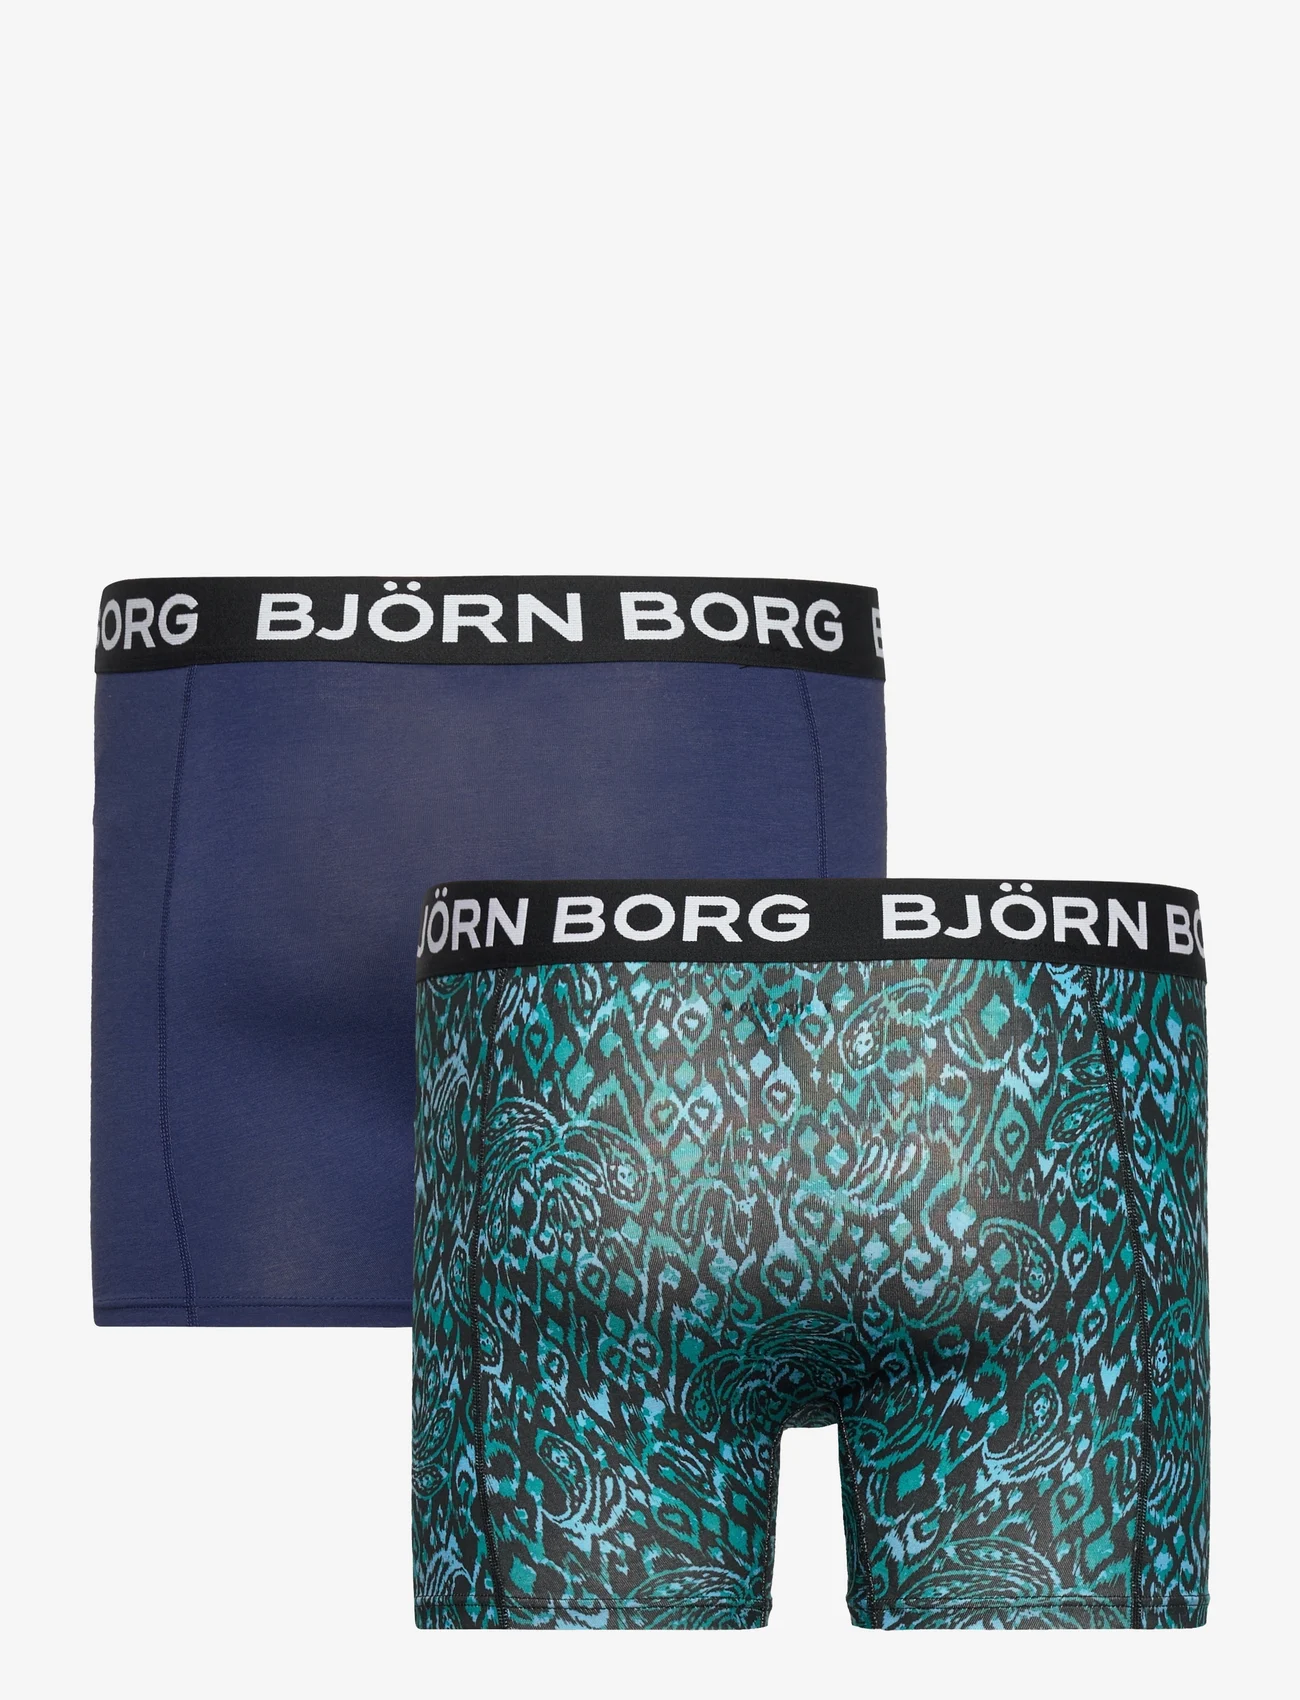 Björn Borg - BAMBOO COTTON BLEND BOXER 2p - lowest prices - multipack 1 - 1